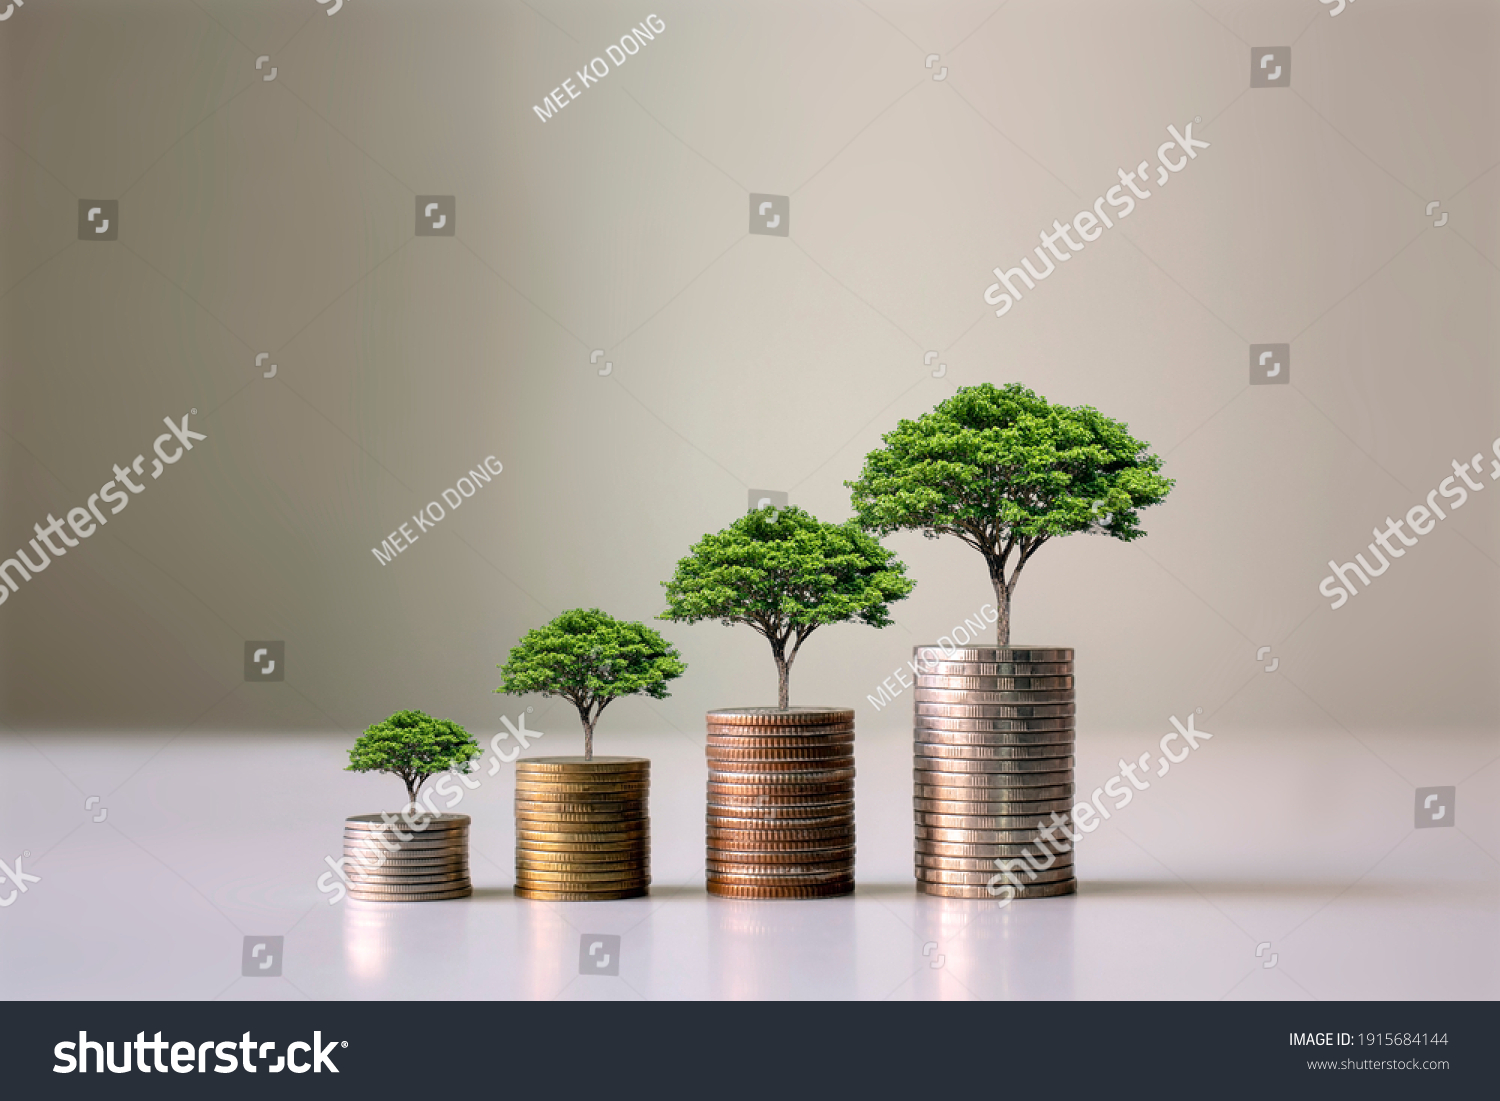 Showing financial developments and business growth with a growing tree on a coin. #1915684144